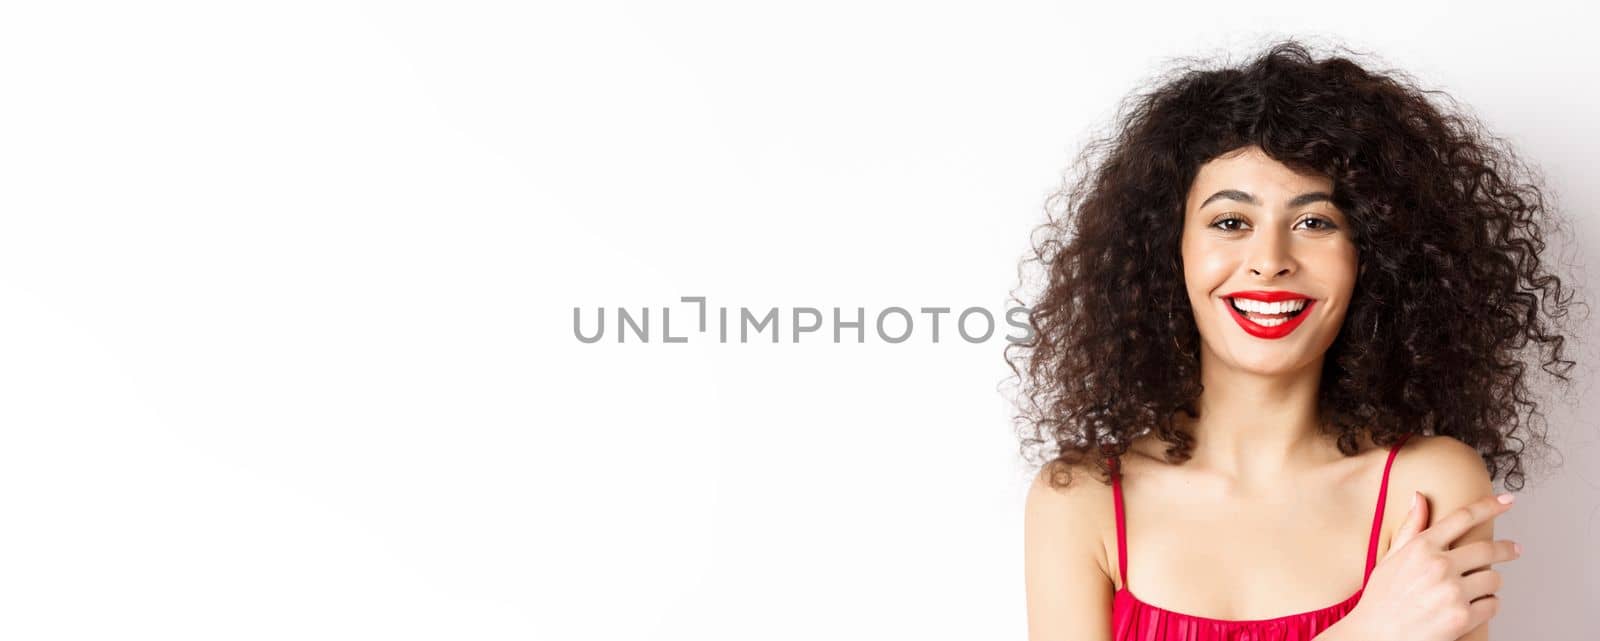 Close-up portrait of beautiful lady with curly hair and red lips, smiling and laughing happy, standing on white background.